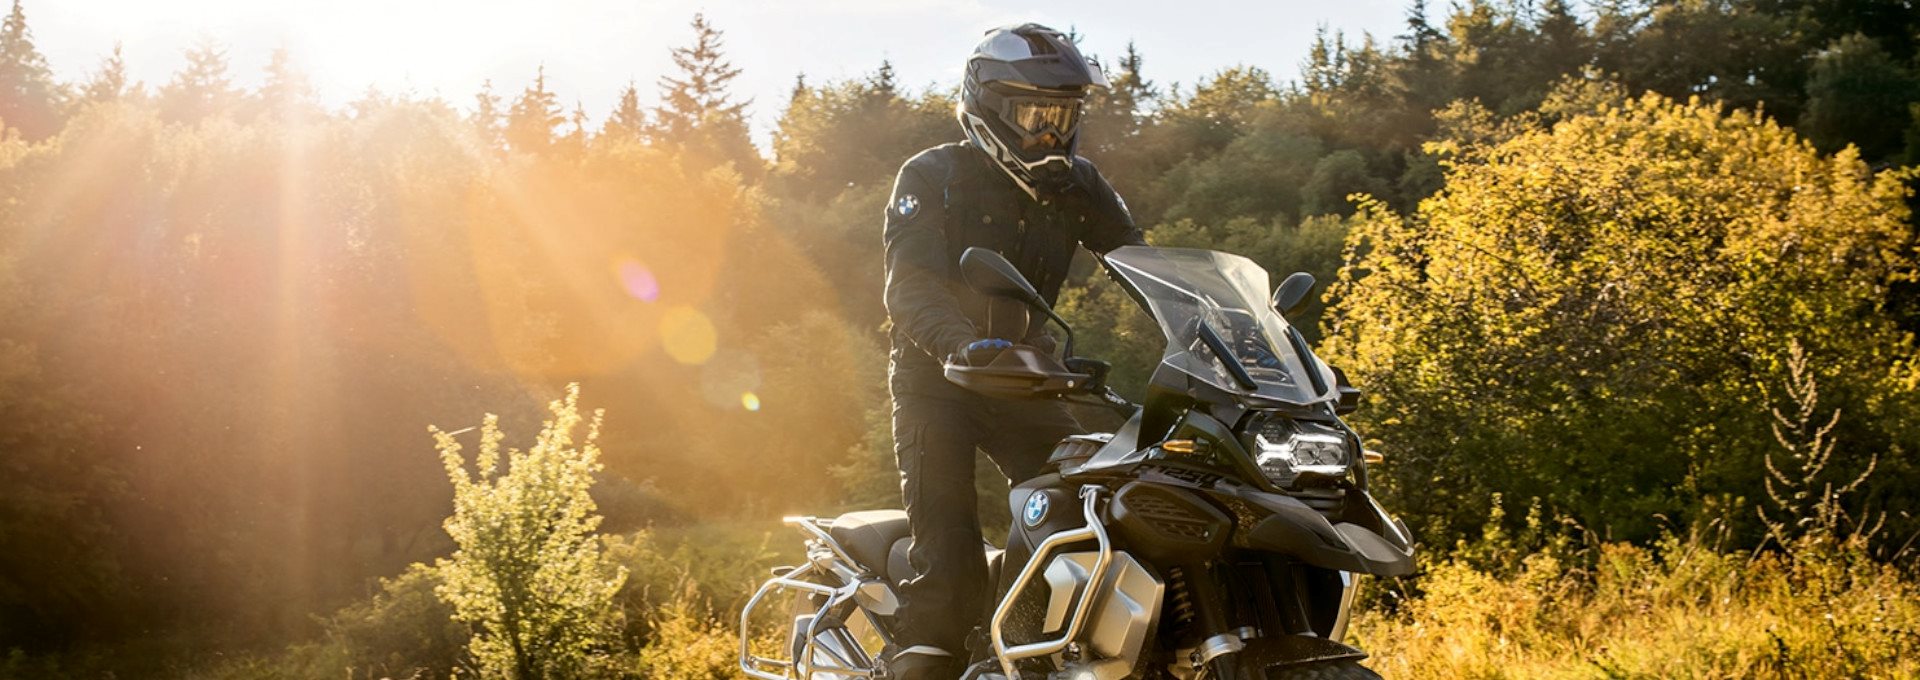 GET UP TO 40,000 SEK* IN VALUE WITH YOUR PURCHASE OF A FULLY EQUIPPED BMW R 1250 GS ADVENTURE**
